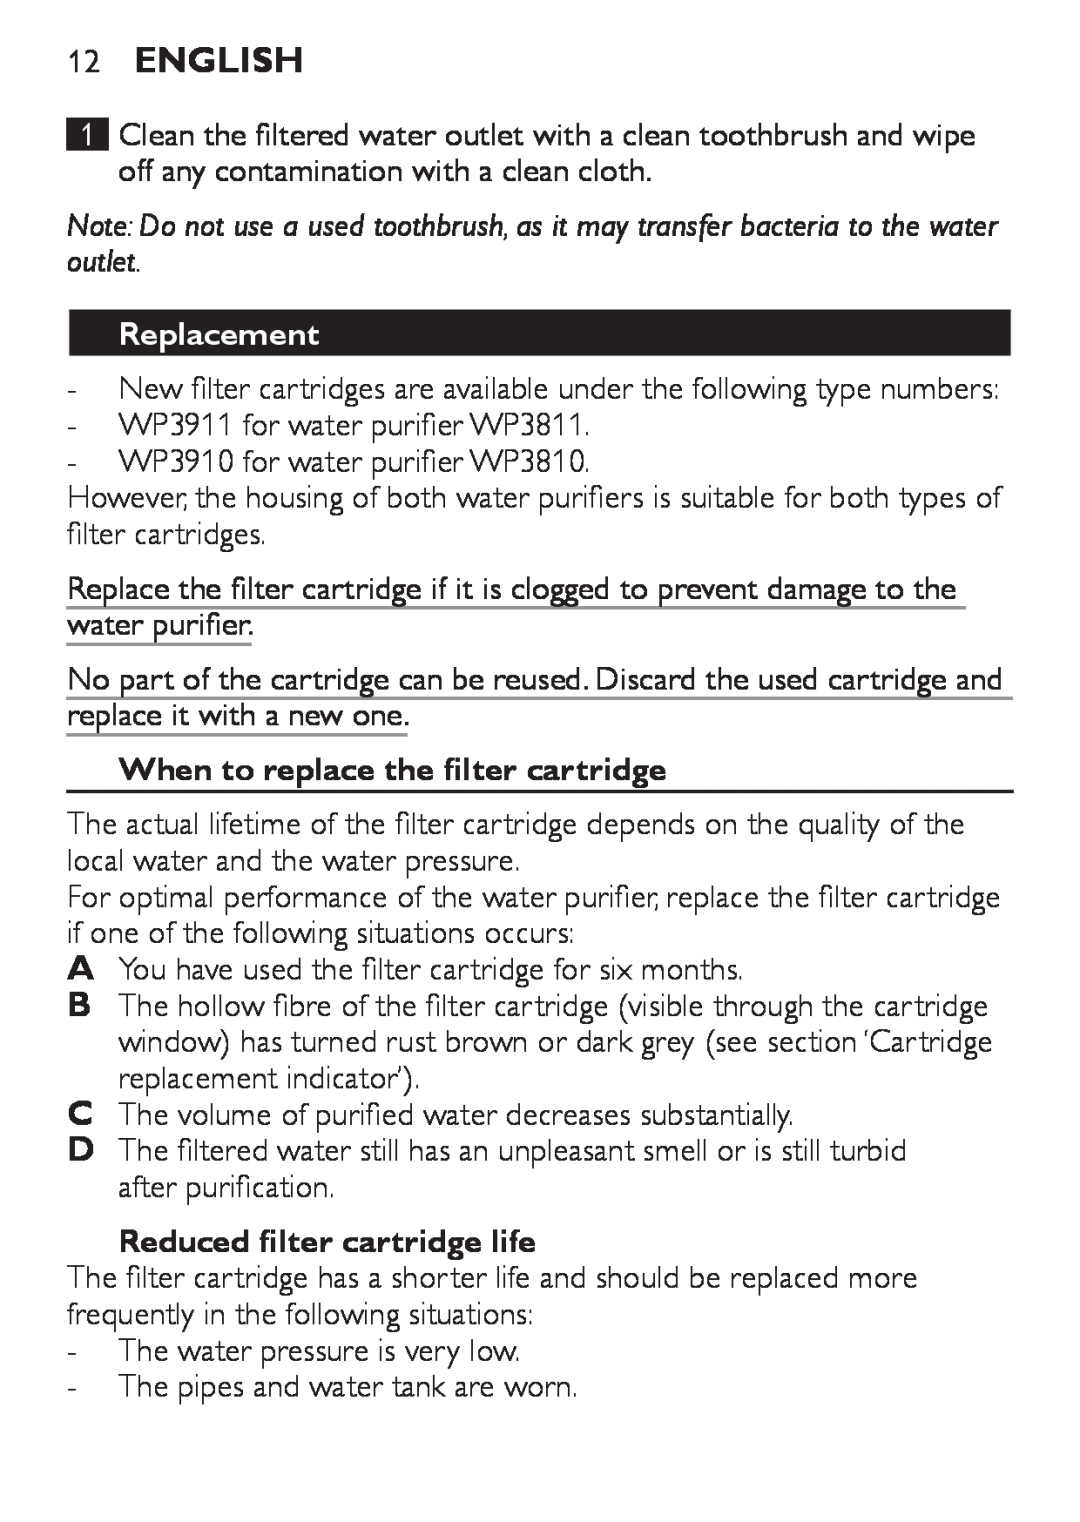 Philips WP3810, WP3811 manual English, Replacement, When to replace the filter cartridge, Reduced filter cartridge life 